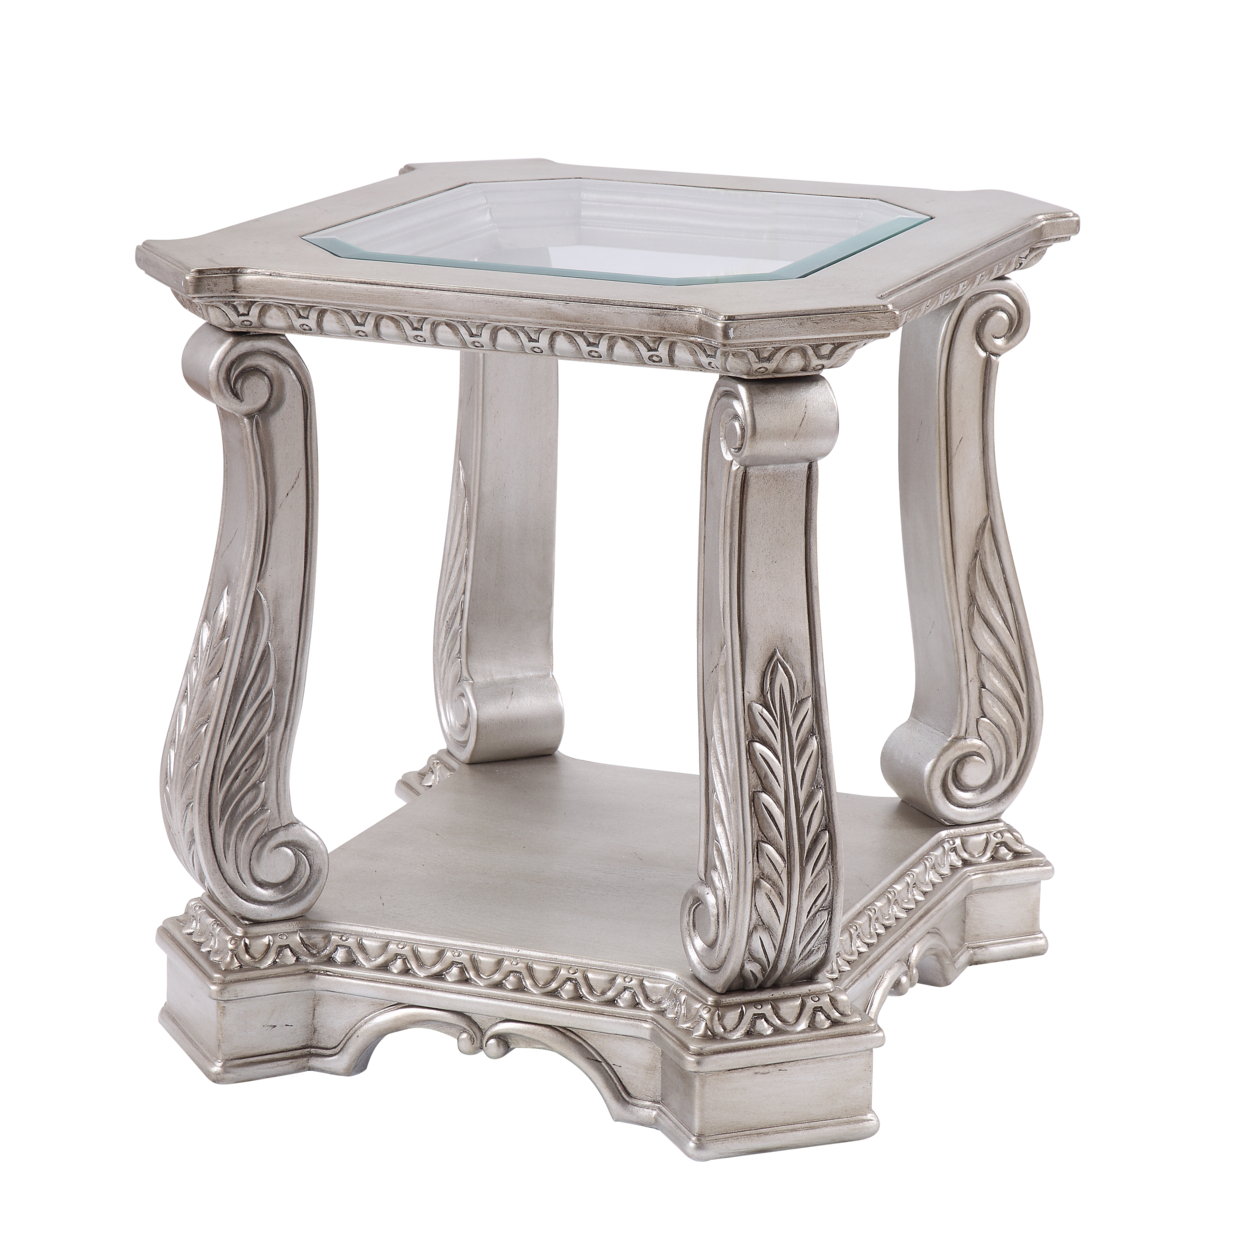 Antique Wooden End Table With Polyresin Engravings And Glass Top, Silver And Clear- Saltoro Sherpi